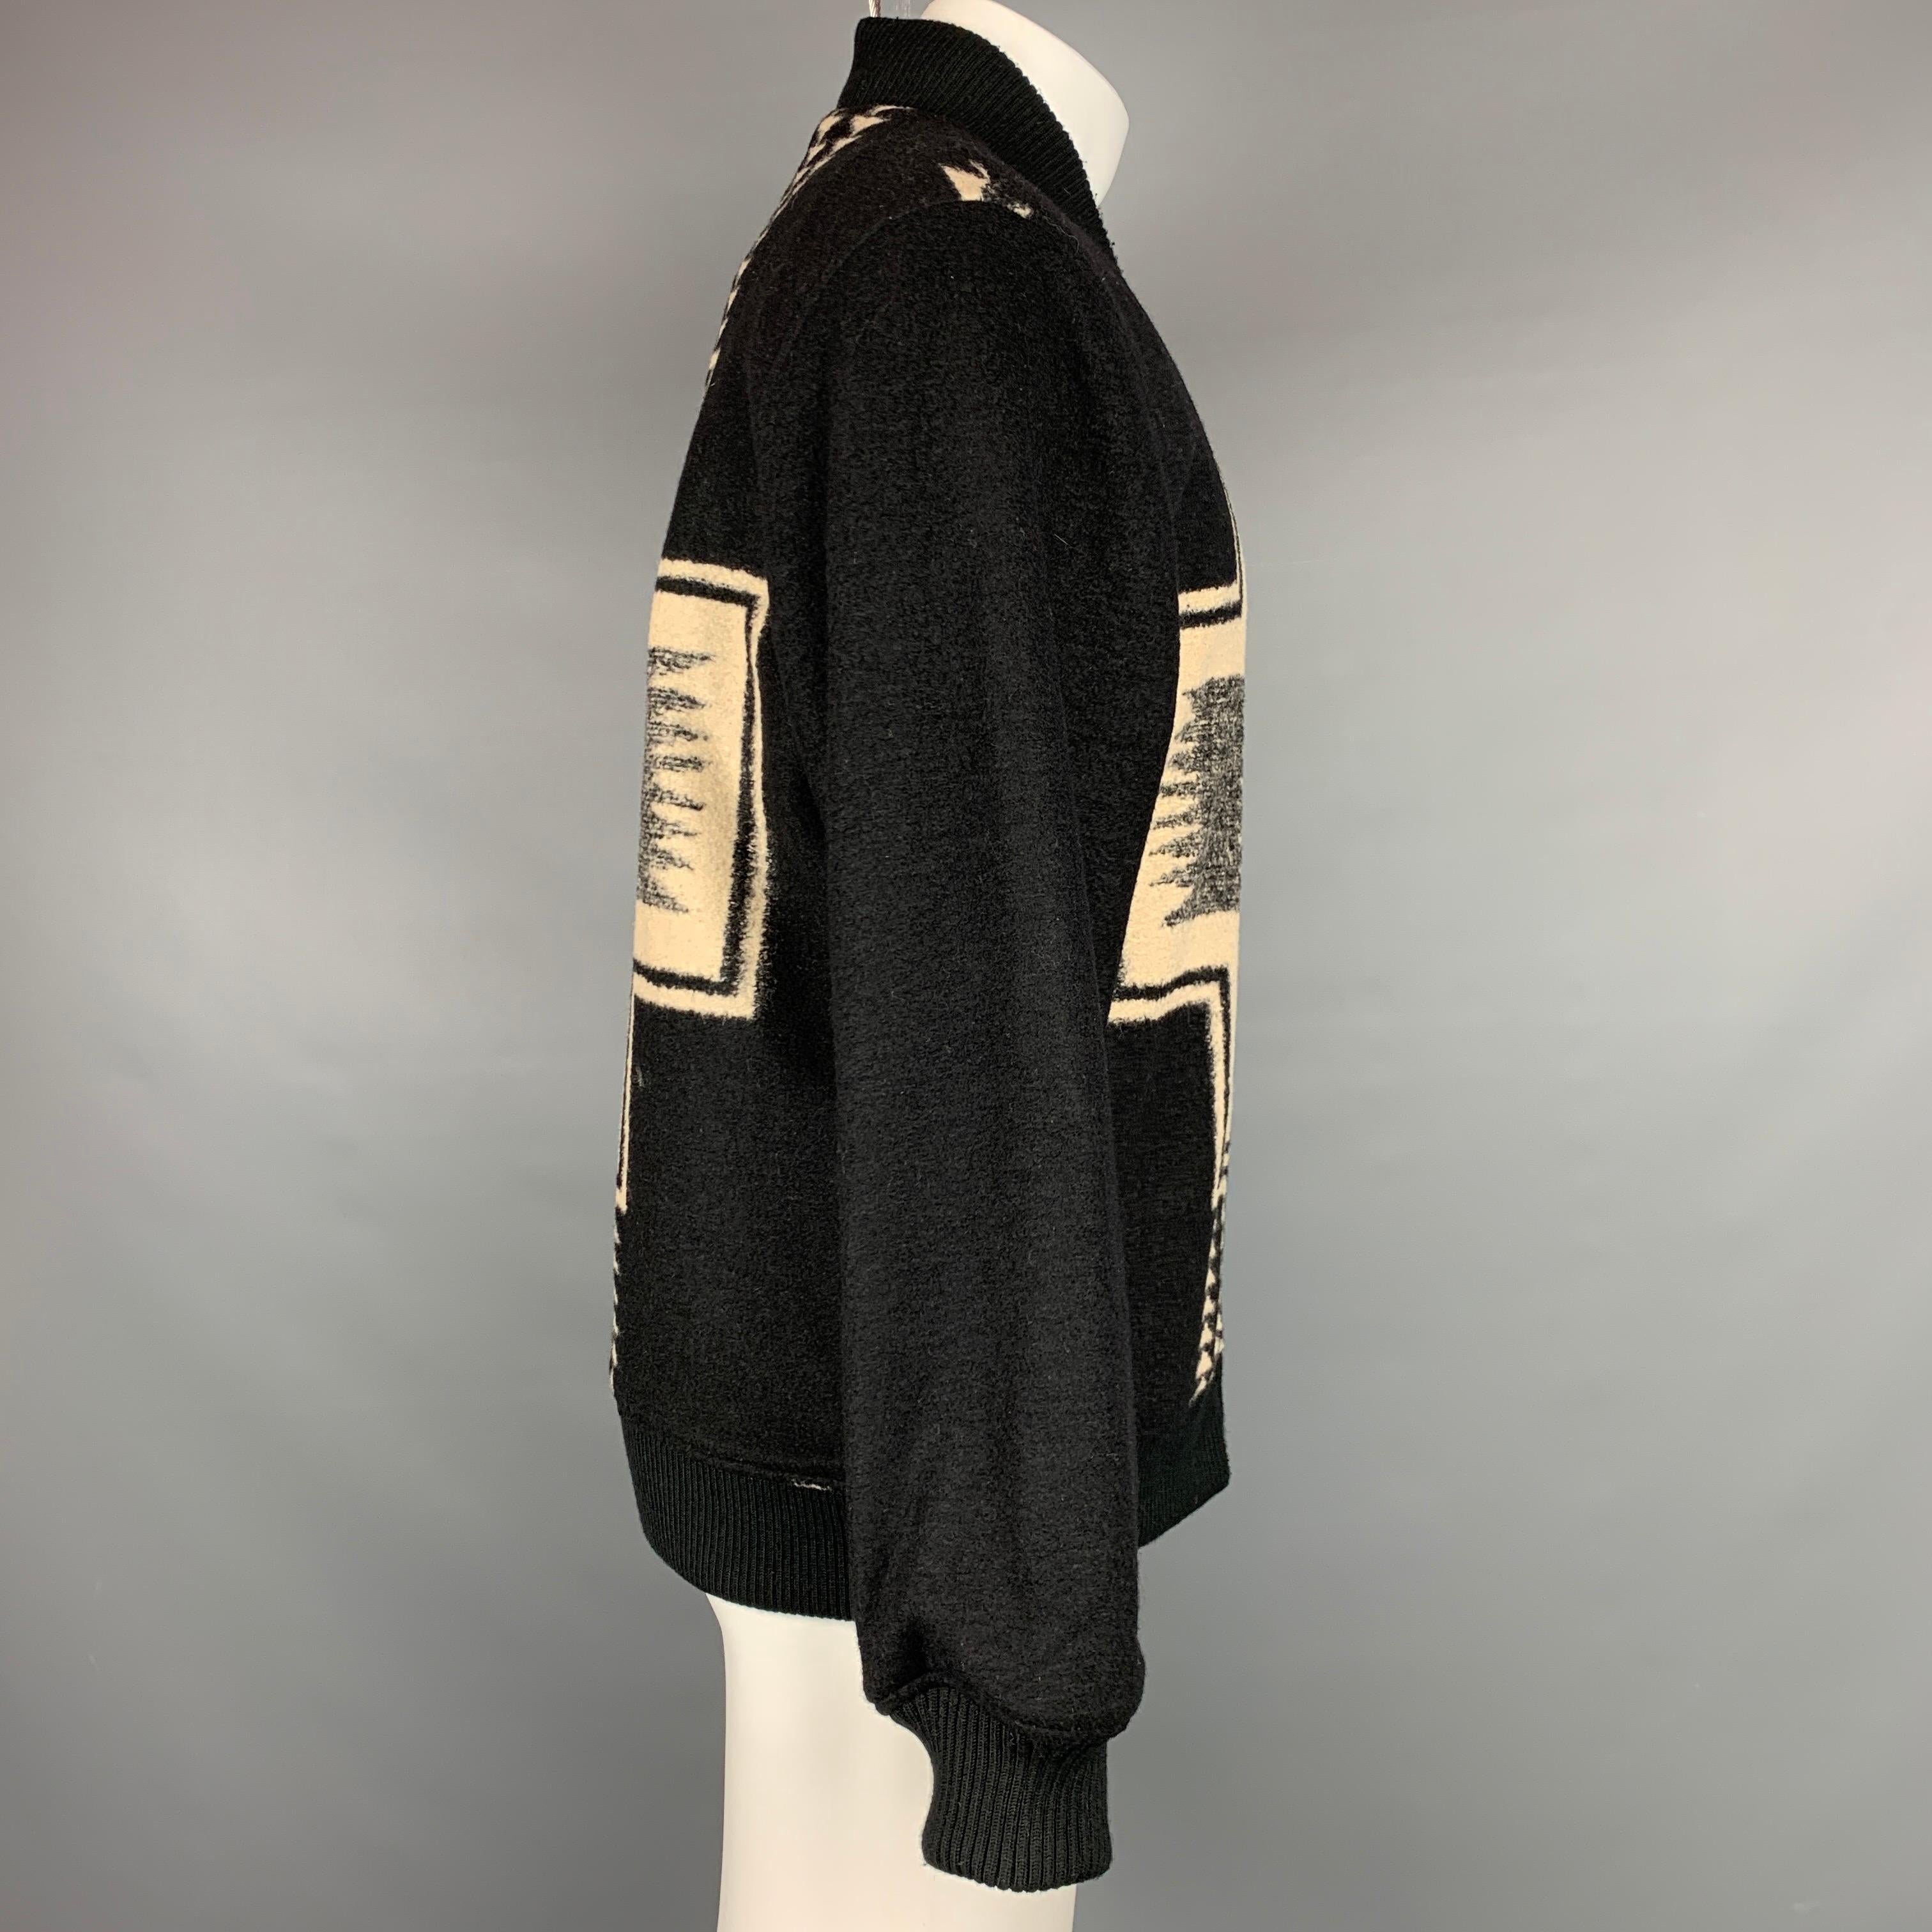 PENDLETON jacket comes in a black & beige woven wool blend featuring a bomber style, ribbed hem, and a zip up closure. 

New With Tags. 
Marked: M

Measurements:

Shoulder: 19 in.
Chest: 44 in.
Sleeve: 25.5 in.
Length: 27.5 in. 